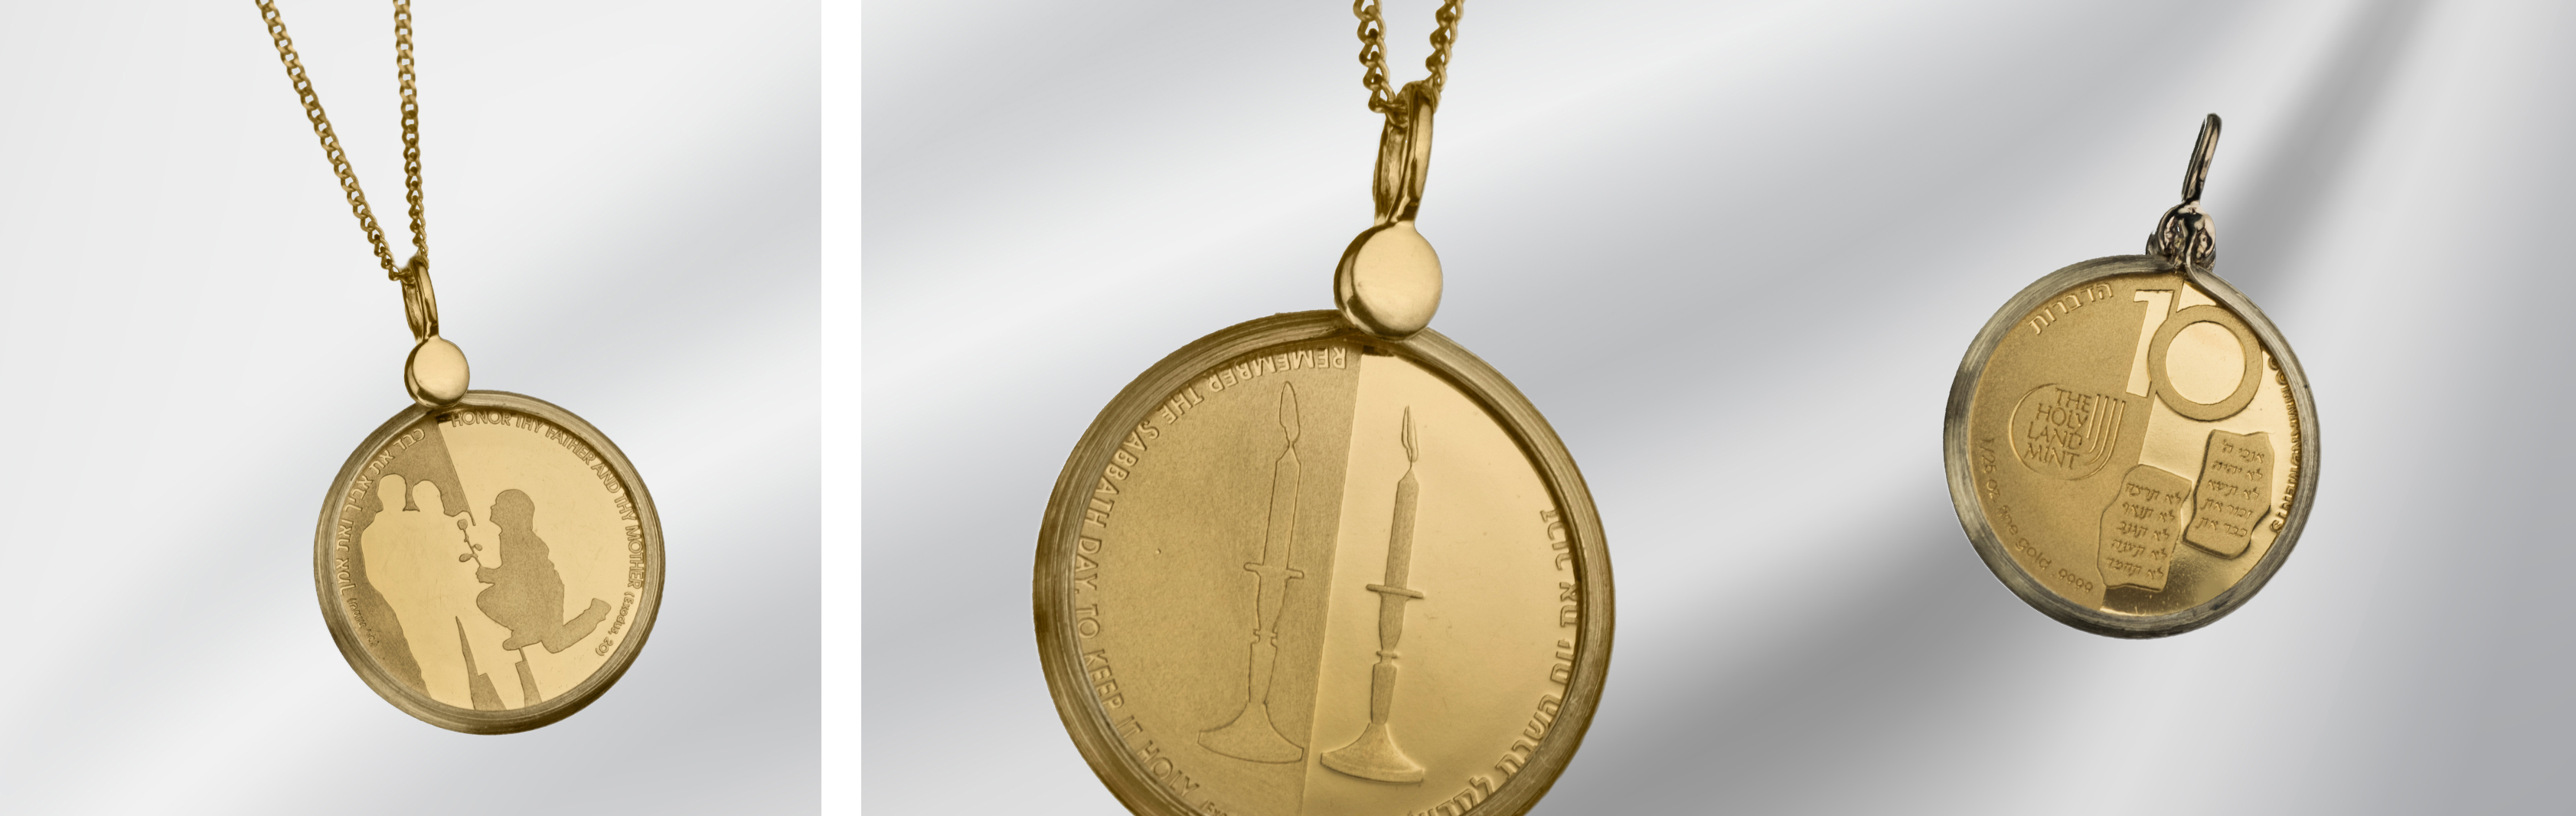 Ten Commandments Adillion | Official Medal set in 14K Gold Jewelry